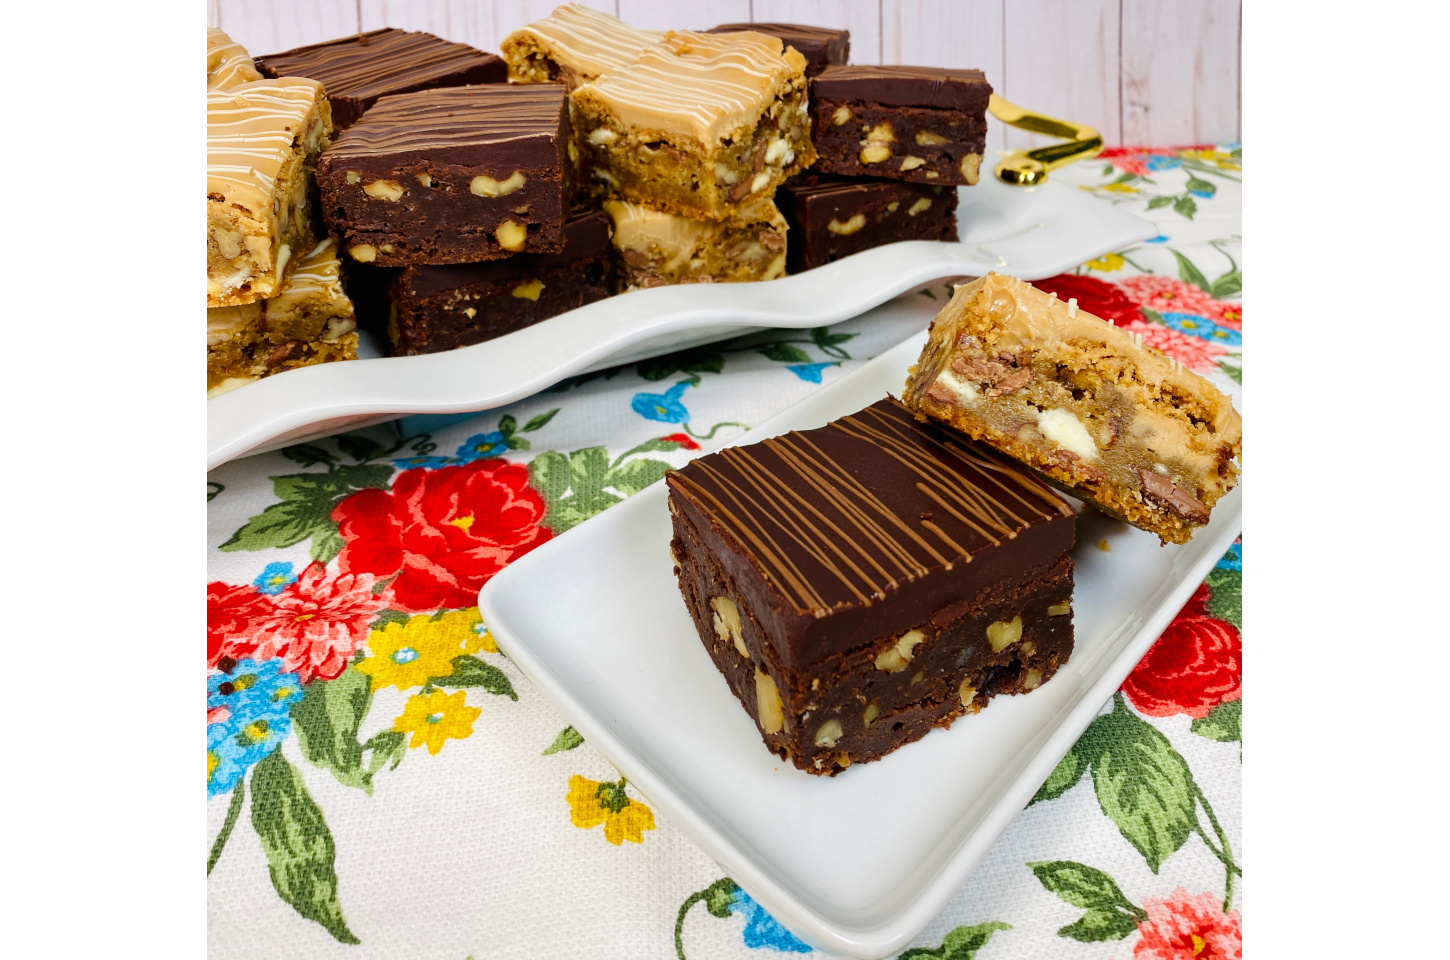 Brownies and Blondies from Florida Academy of Baking